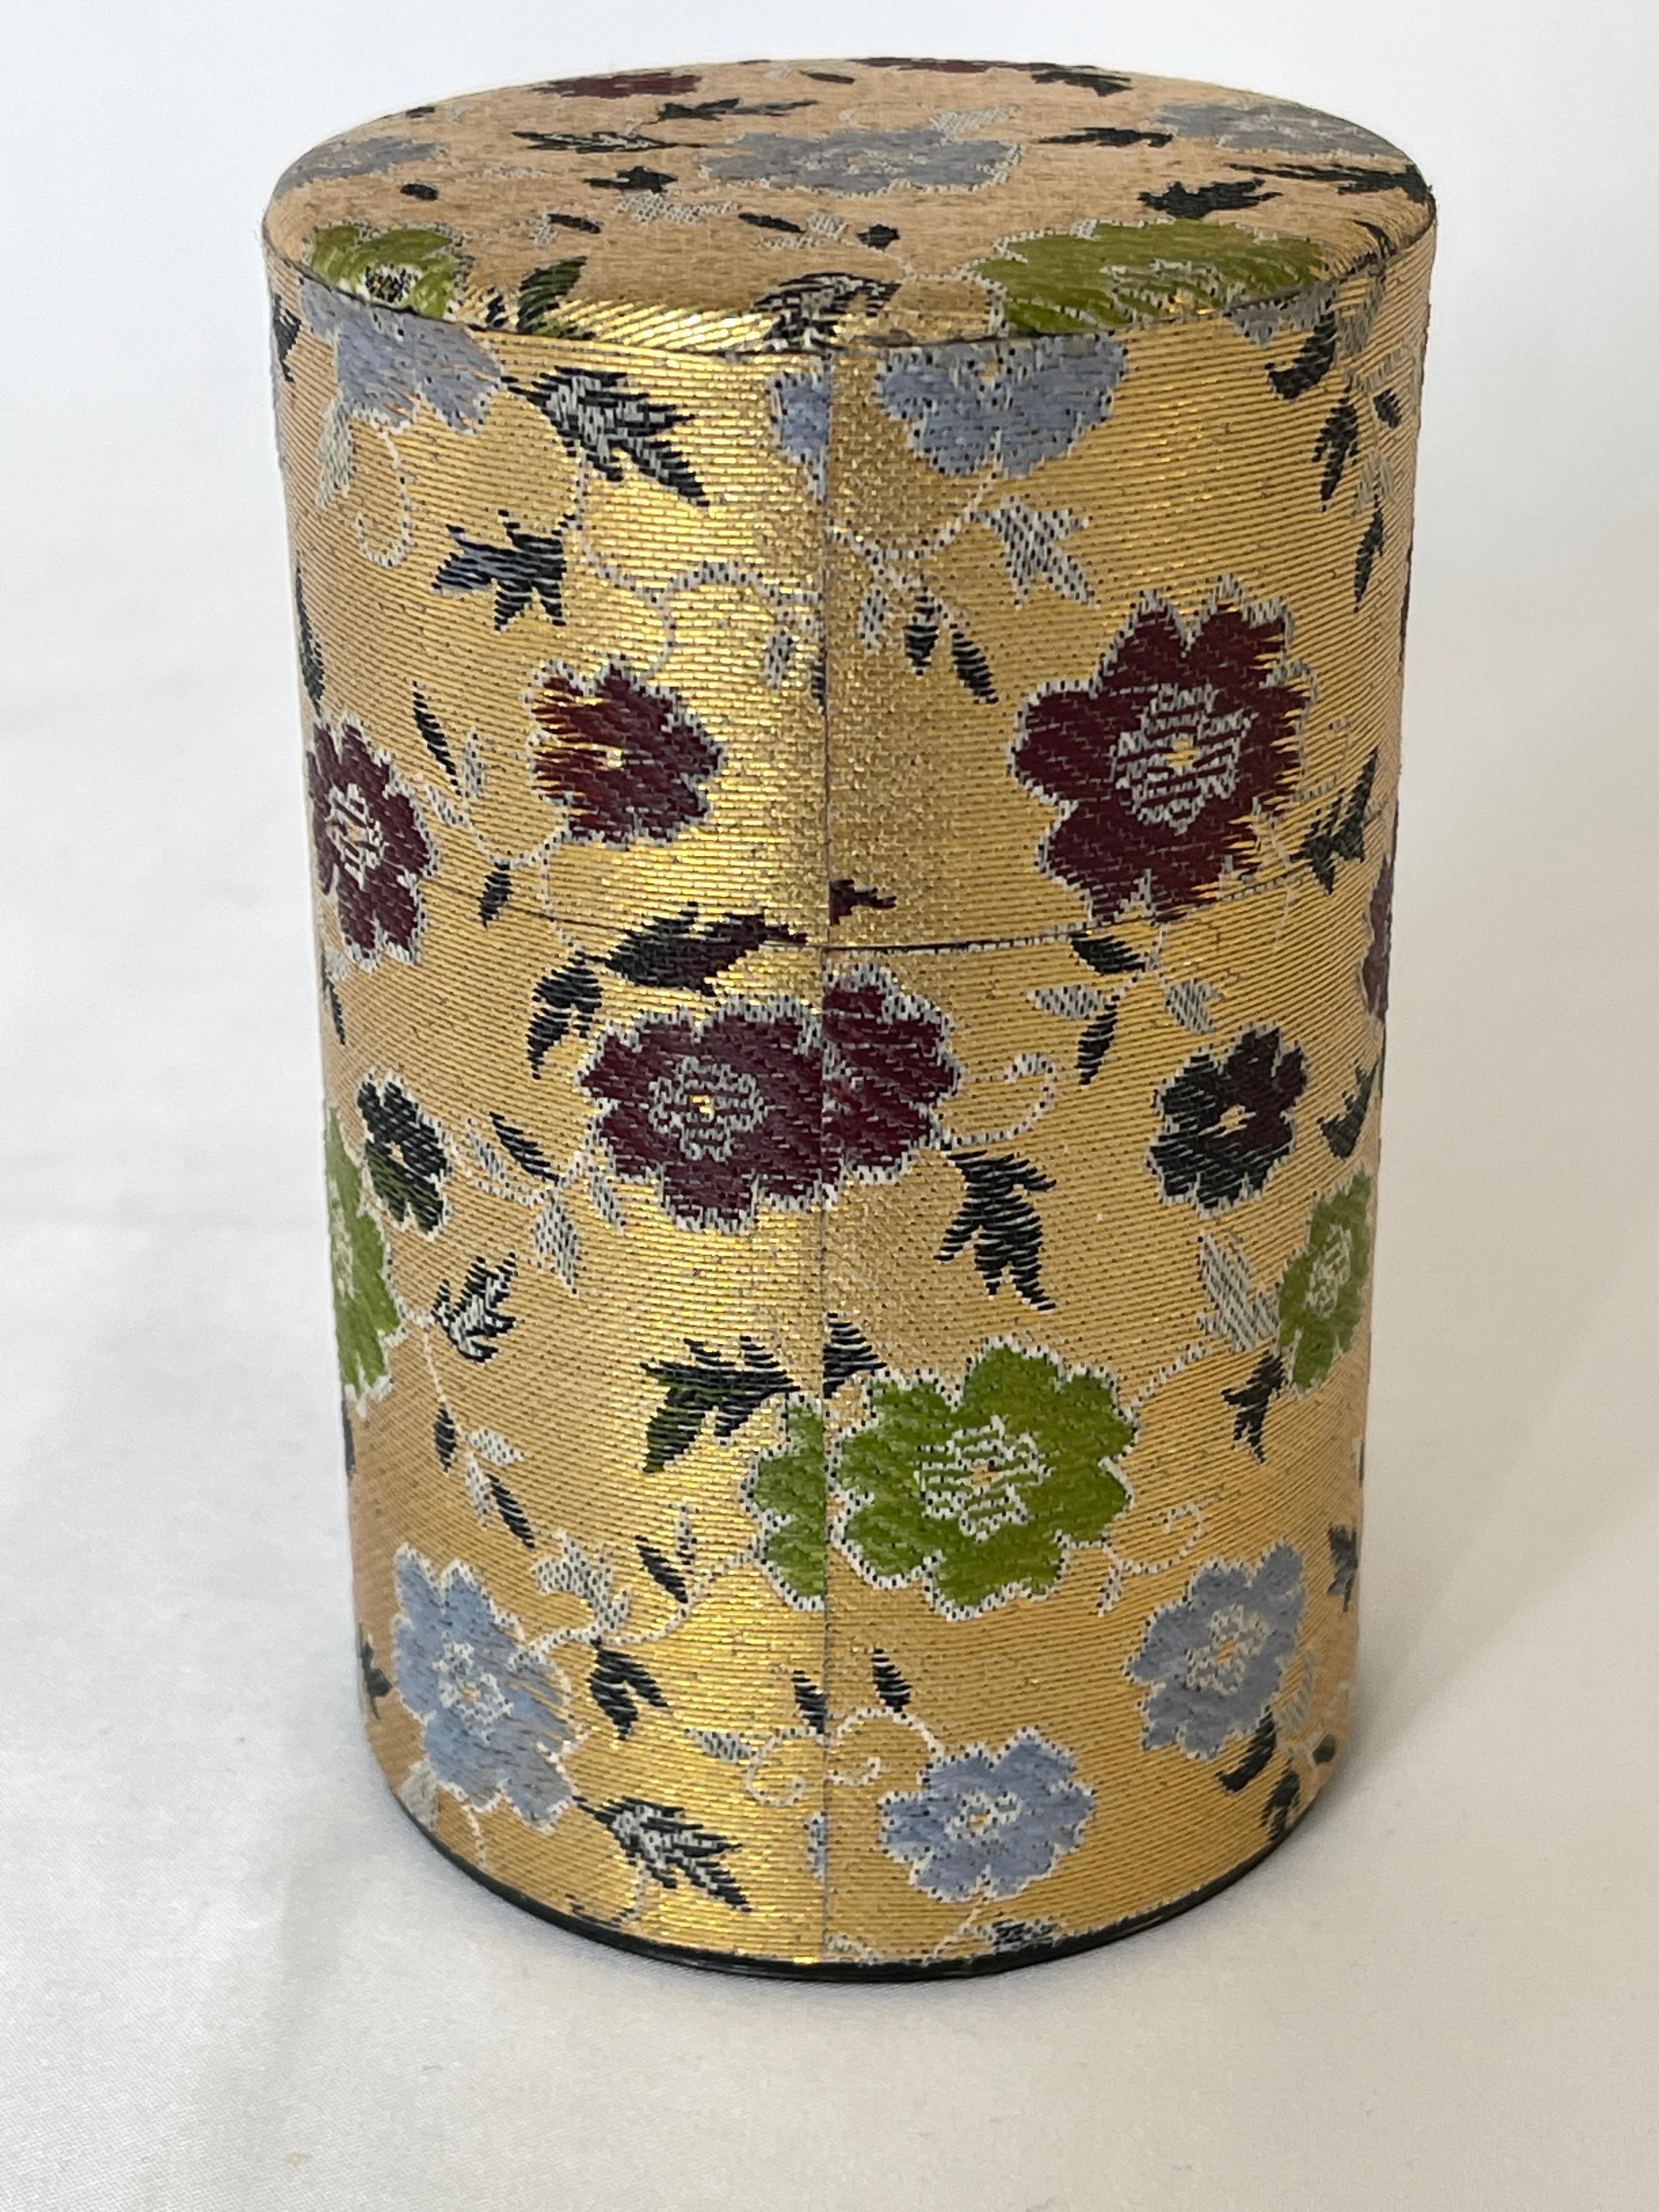 1960's tin tea caddy covered in traditional Japanese woven gold fabric with floral motif. There are two lids, inner and outer to keep tea leaves fresh.